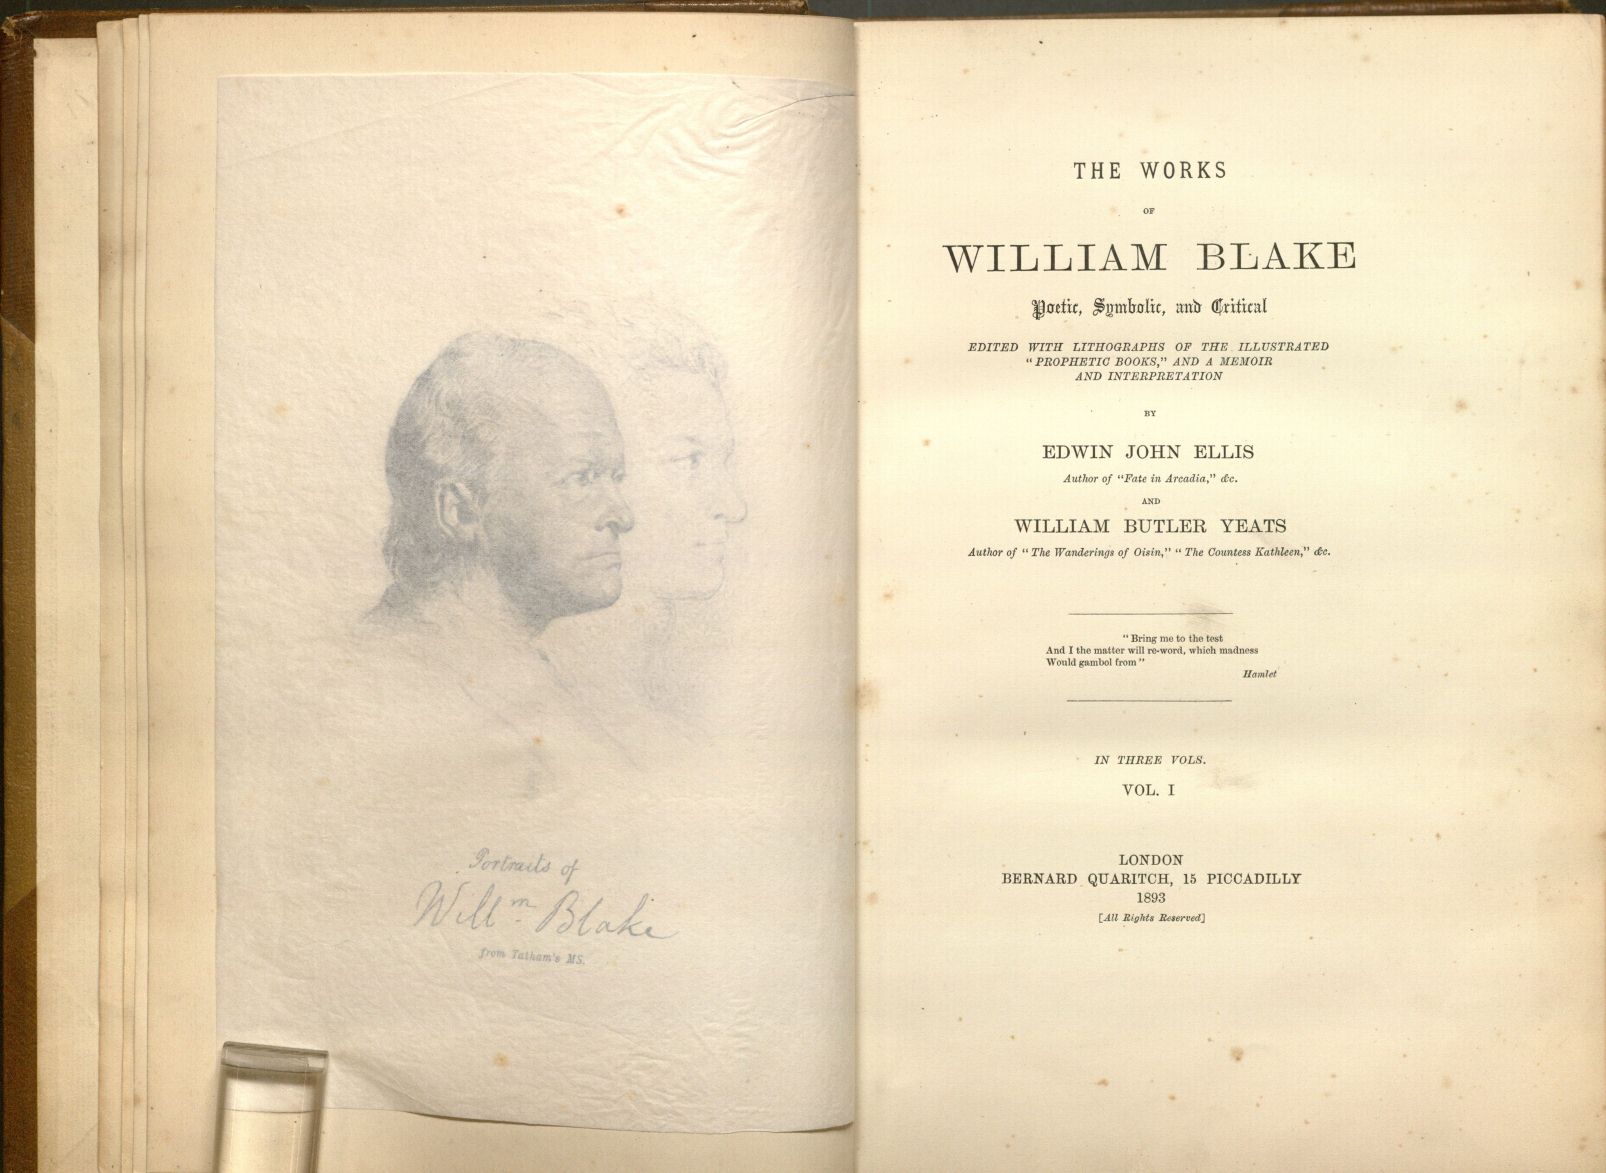 Title page and frontispiece of The Works of William Blake, edited by Edwin John Ellis and William Butler Yeats